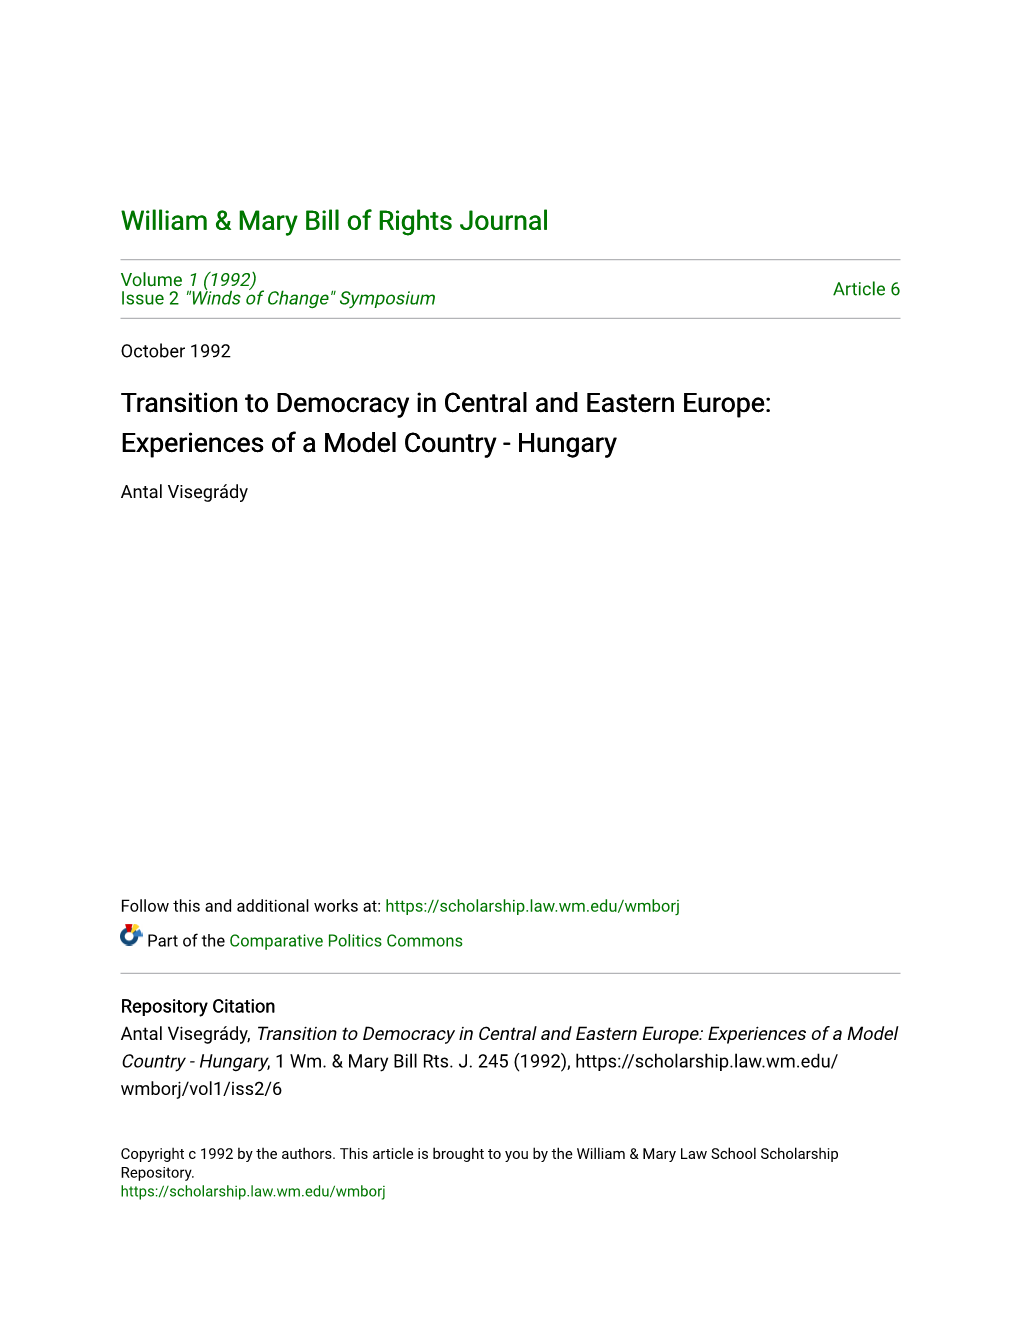 Transition to Democracy in Central and Eastern Europe: Experiences of a Model Country - Hungary